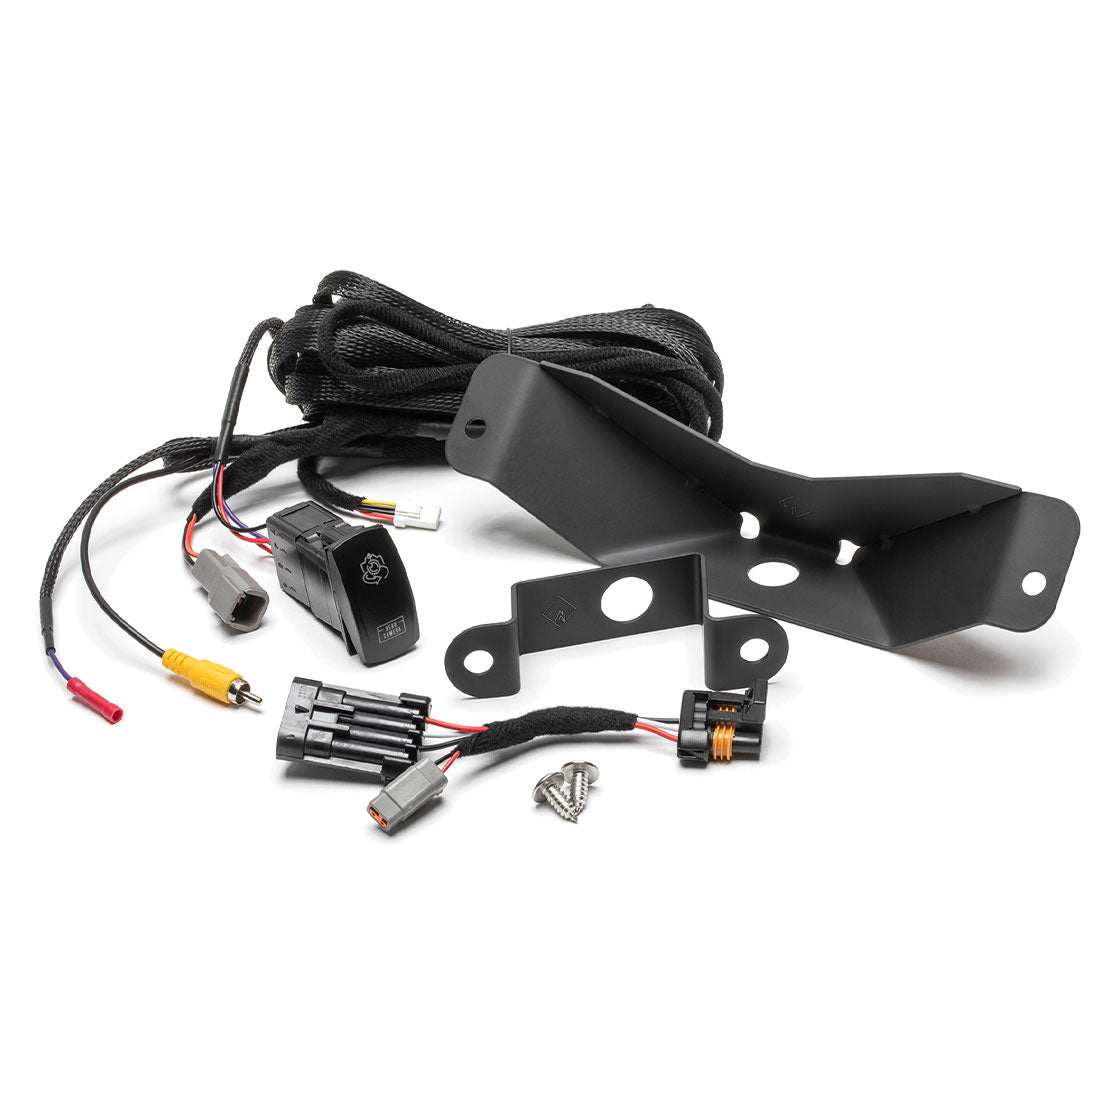 Rockford Fosgate MX-CAM-RNGR18 Camera Plug and Play Harness and Mounting Kit for Select Ranger Models